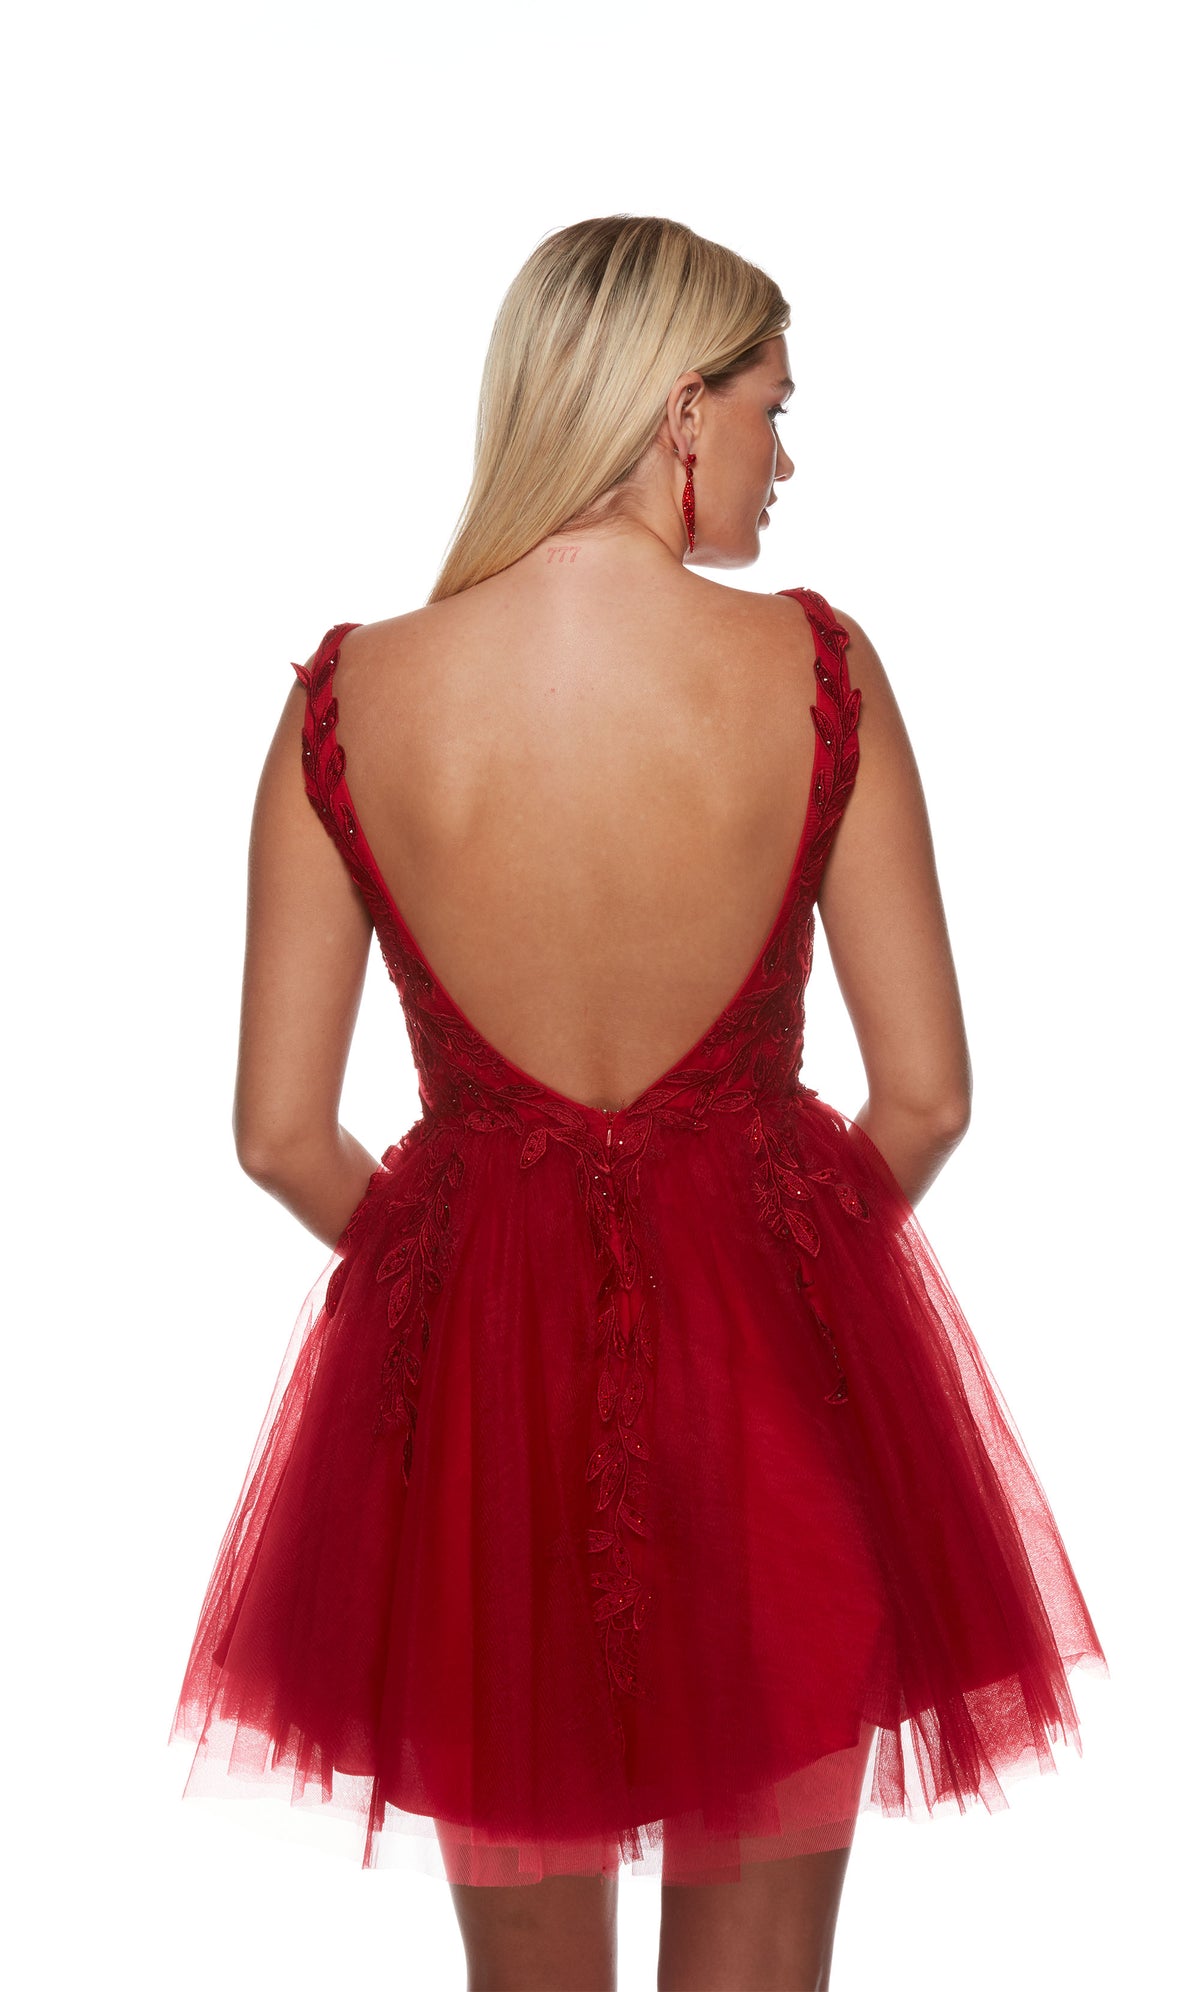 A red, open back short formal dress with floral appliques and a fitted waistline. The skirt is made of layered tulle.